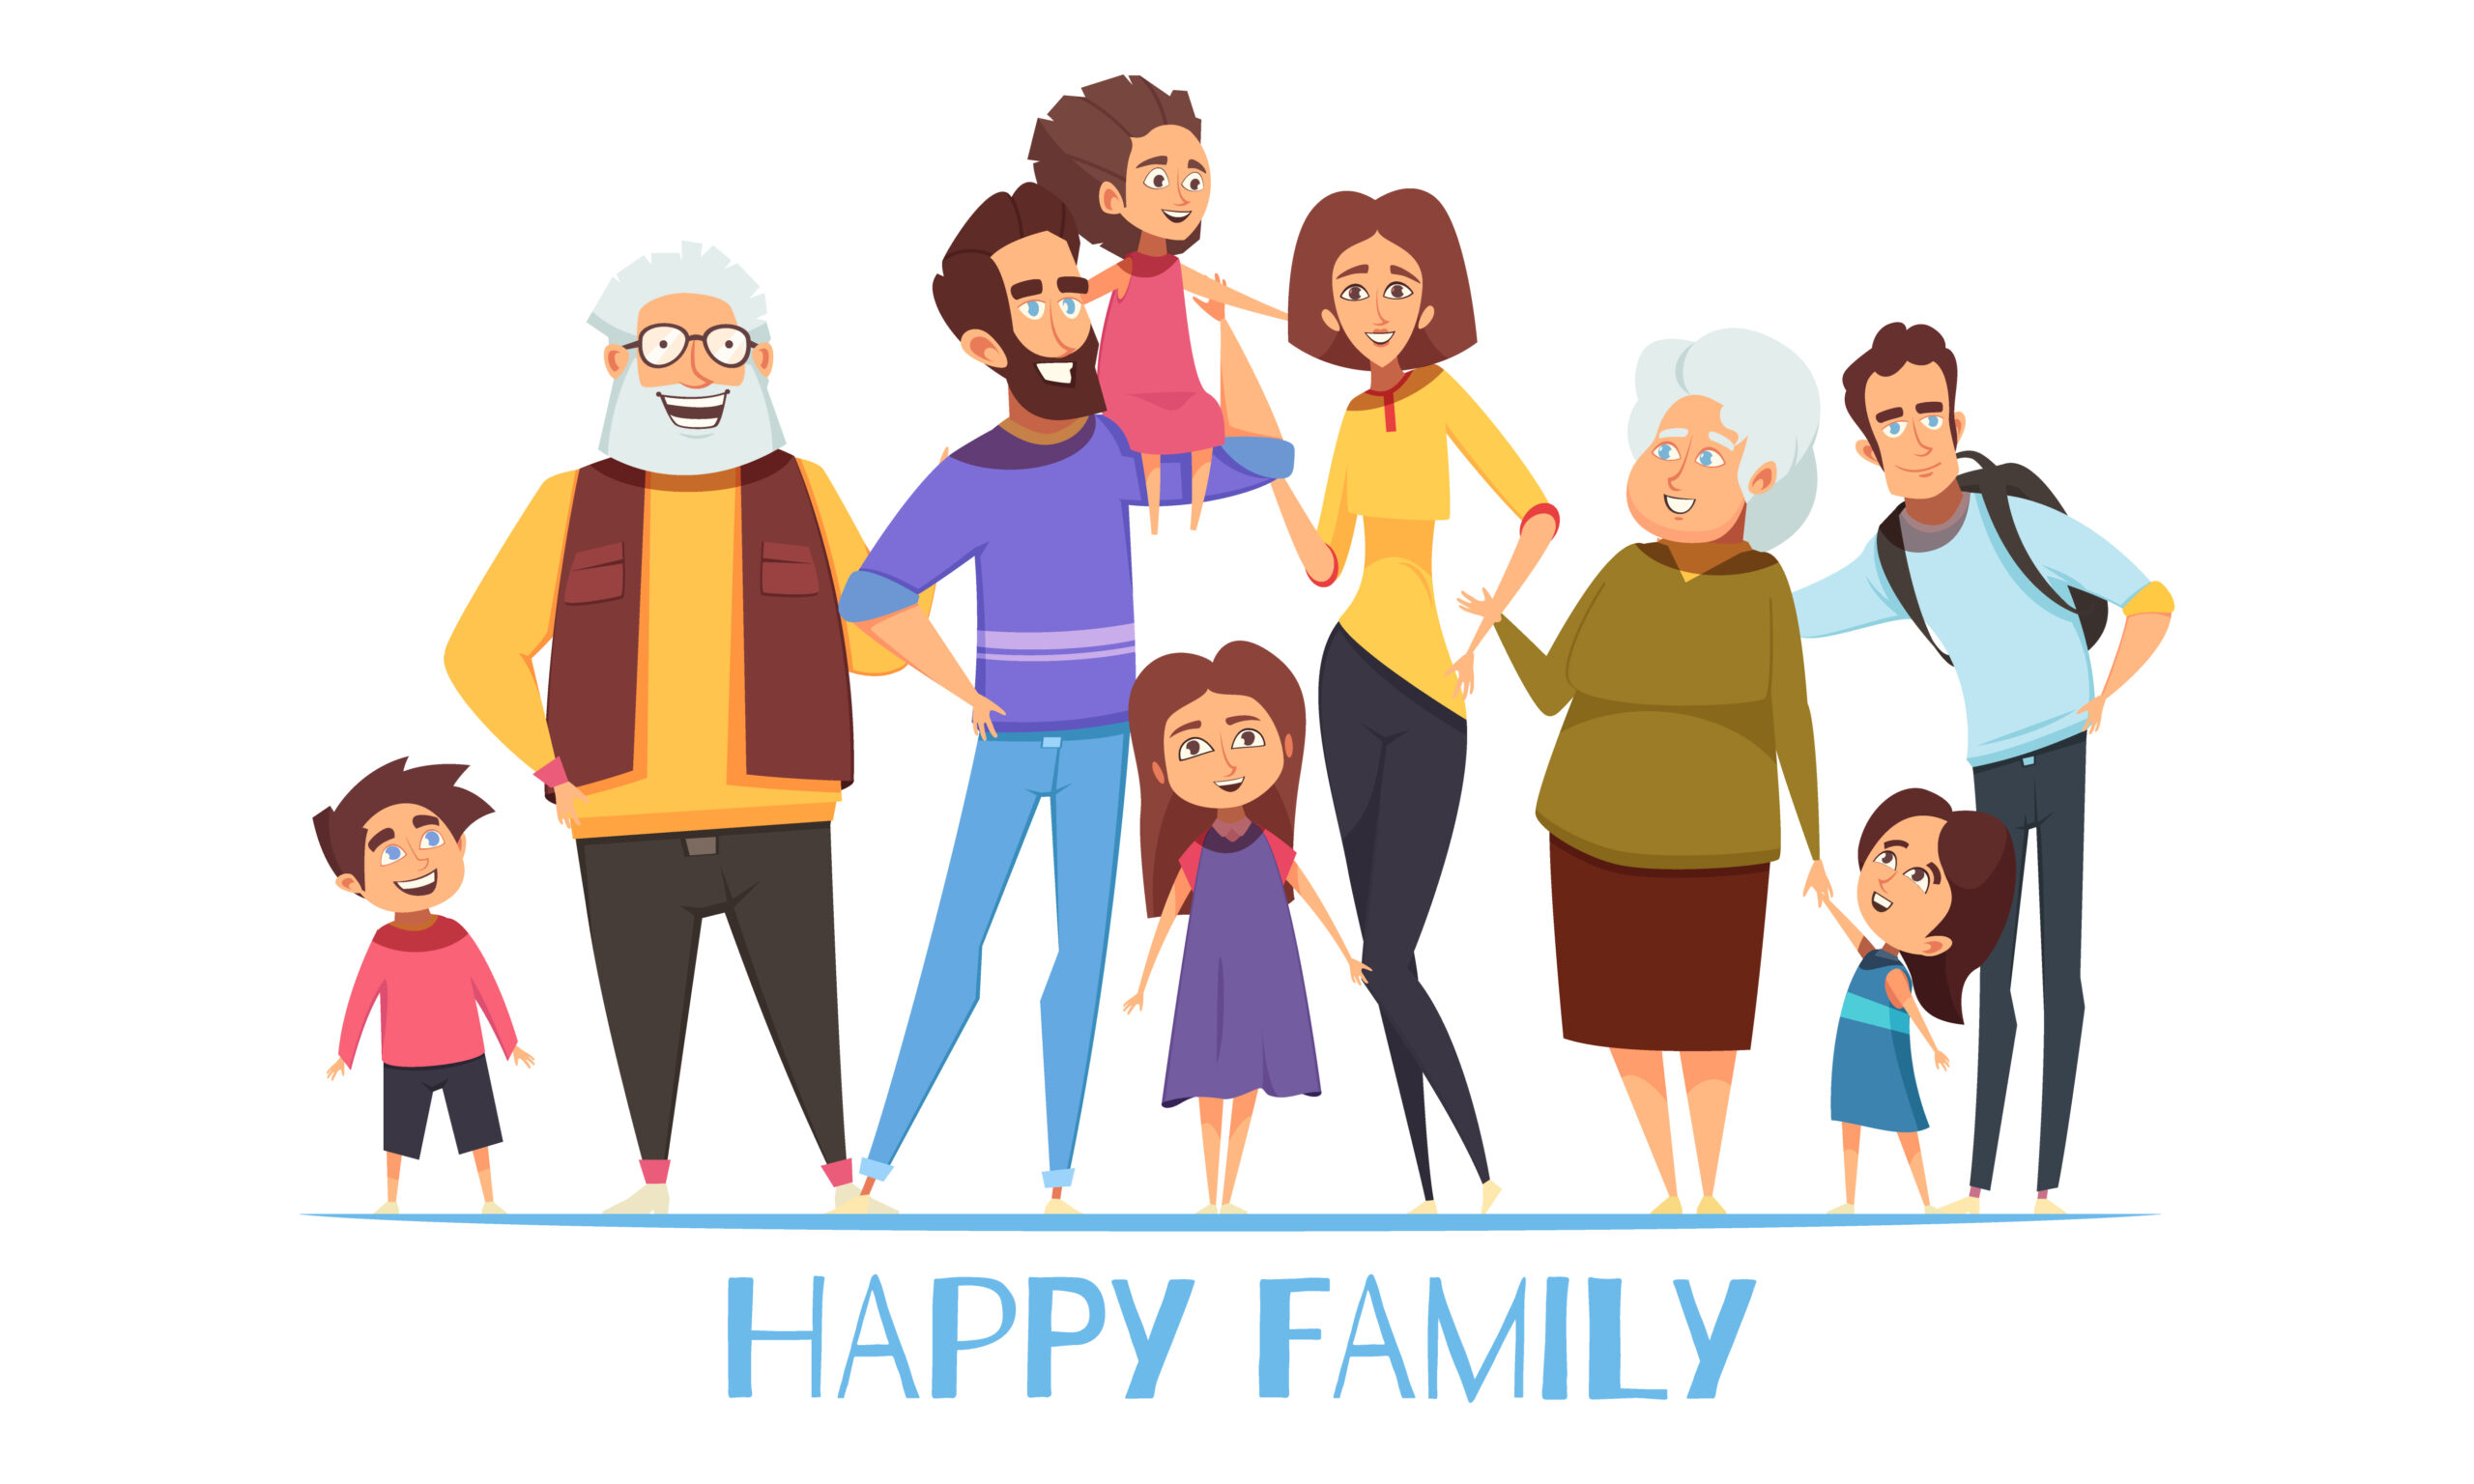 Portrait of happy family with grandparents, mom and dad, kids, uncle on white background vector illustration